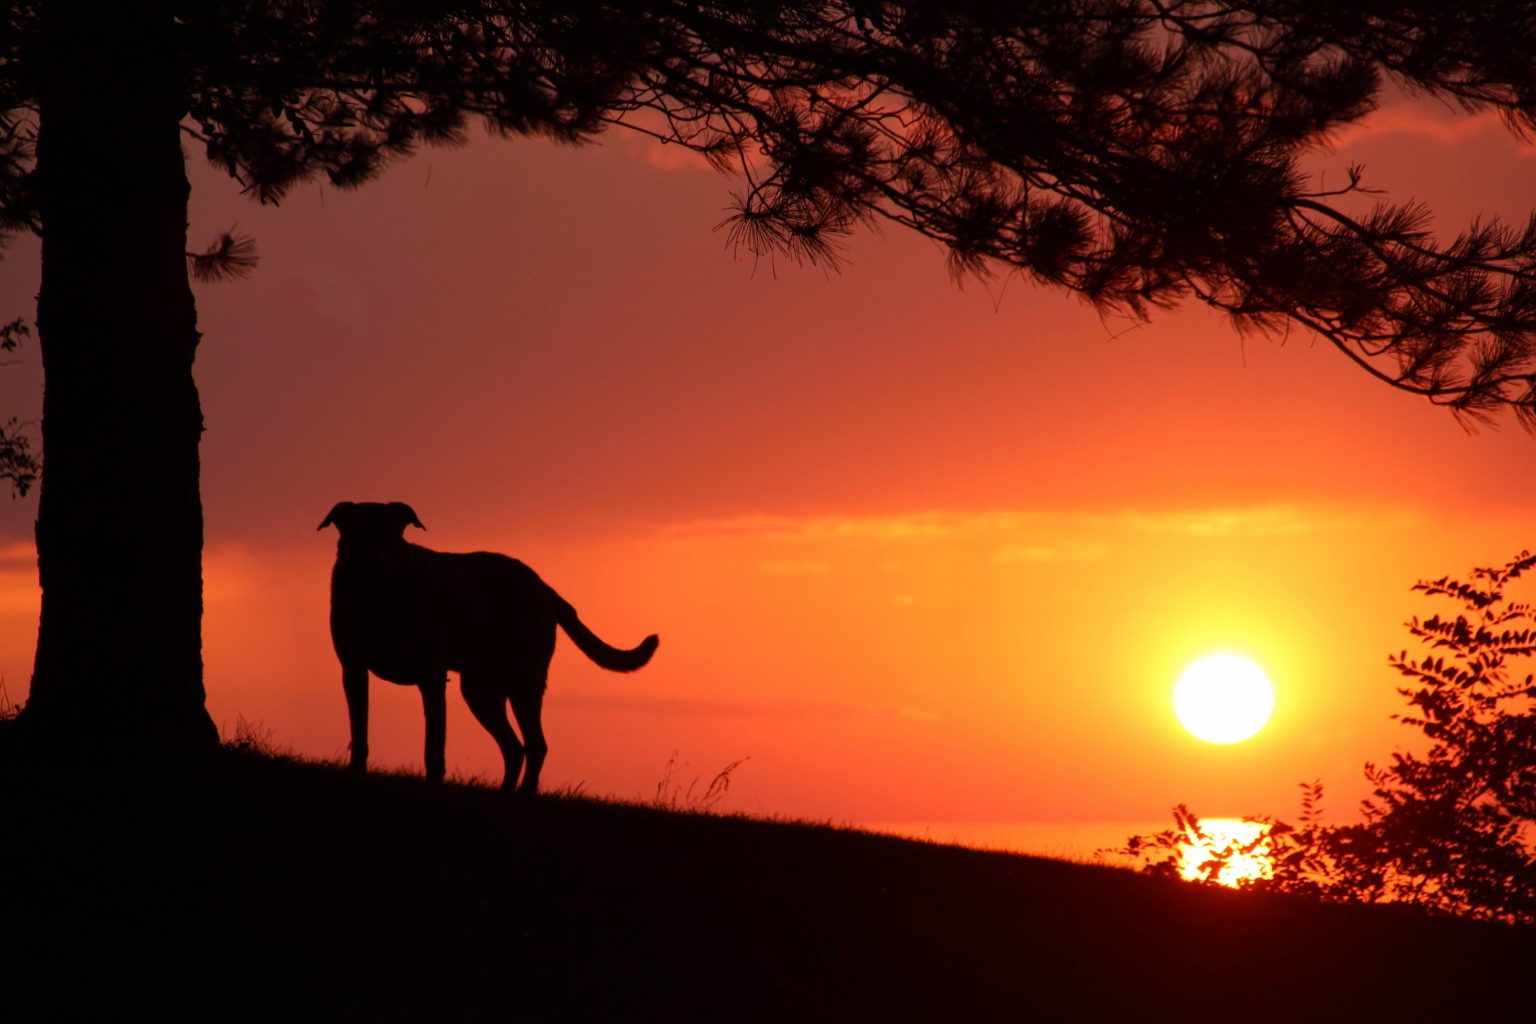 Silhouette of a dog standing next to a tree under a red sunset sky.